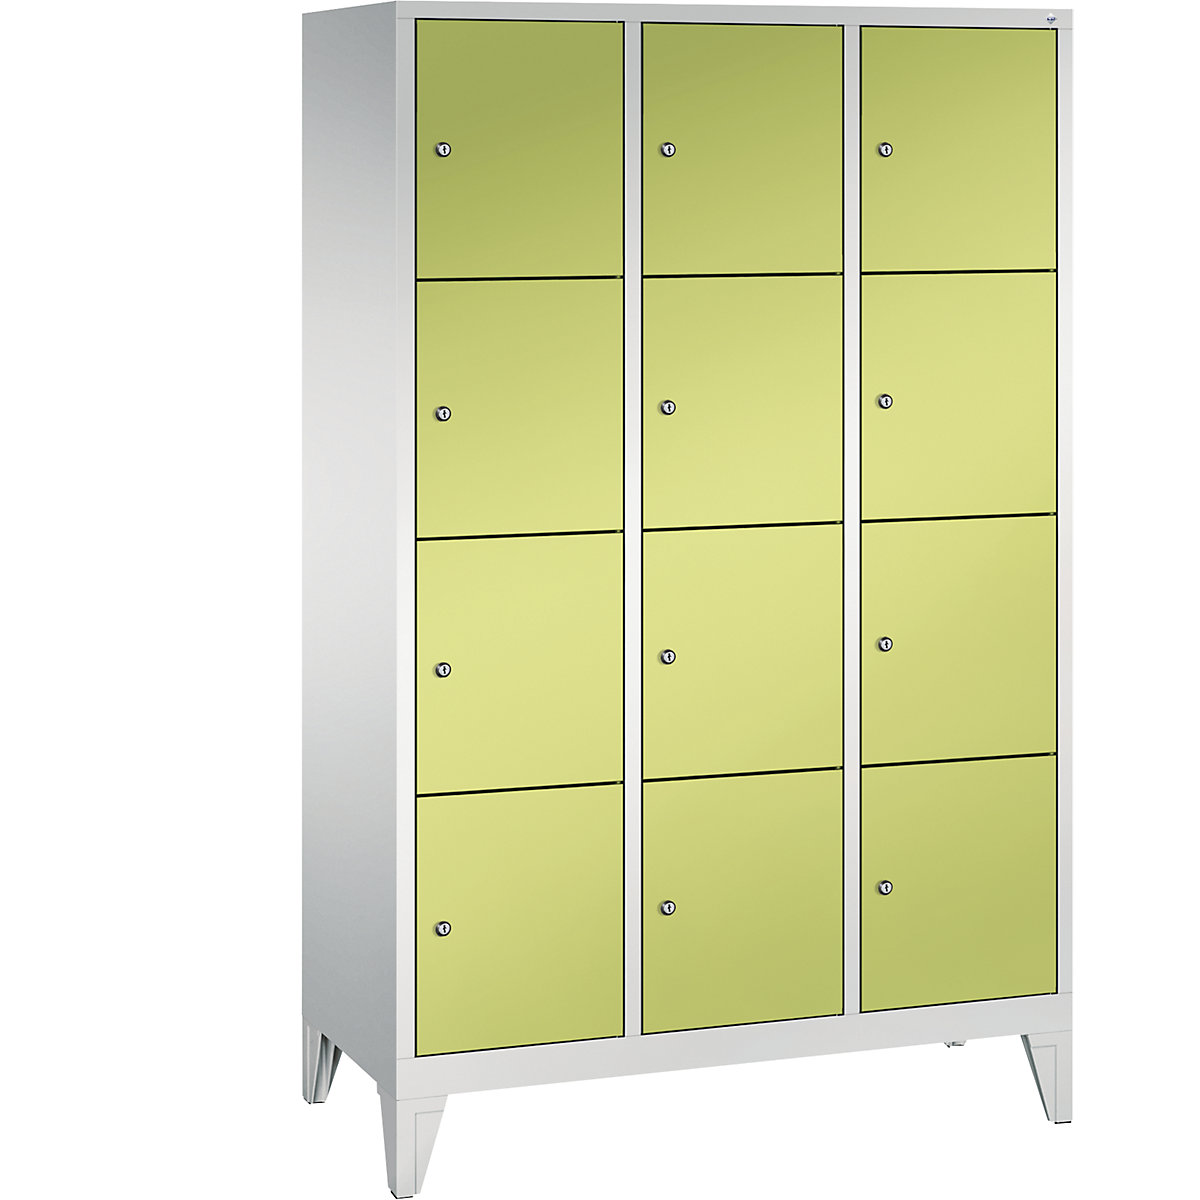 CLASSIC locker unit with feet – C+P, 3 compartments, 4 shelf compartments each, compartment width 400 mm, light grey / viridian green-8